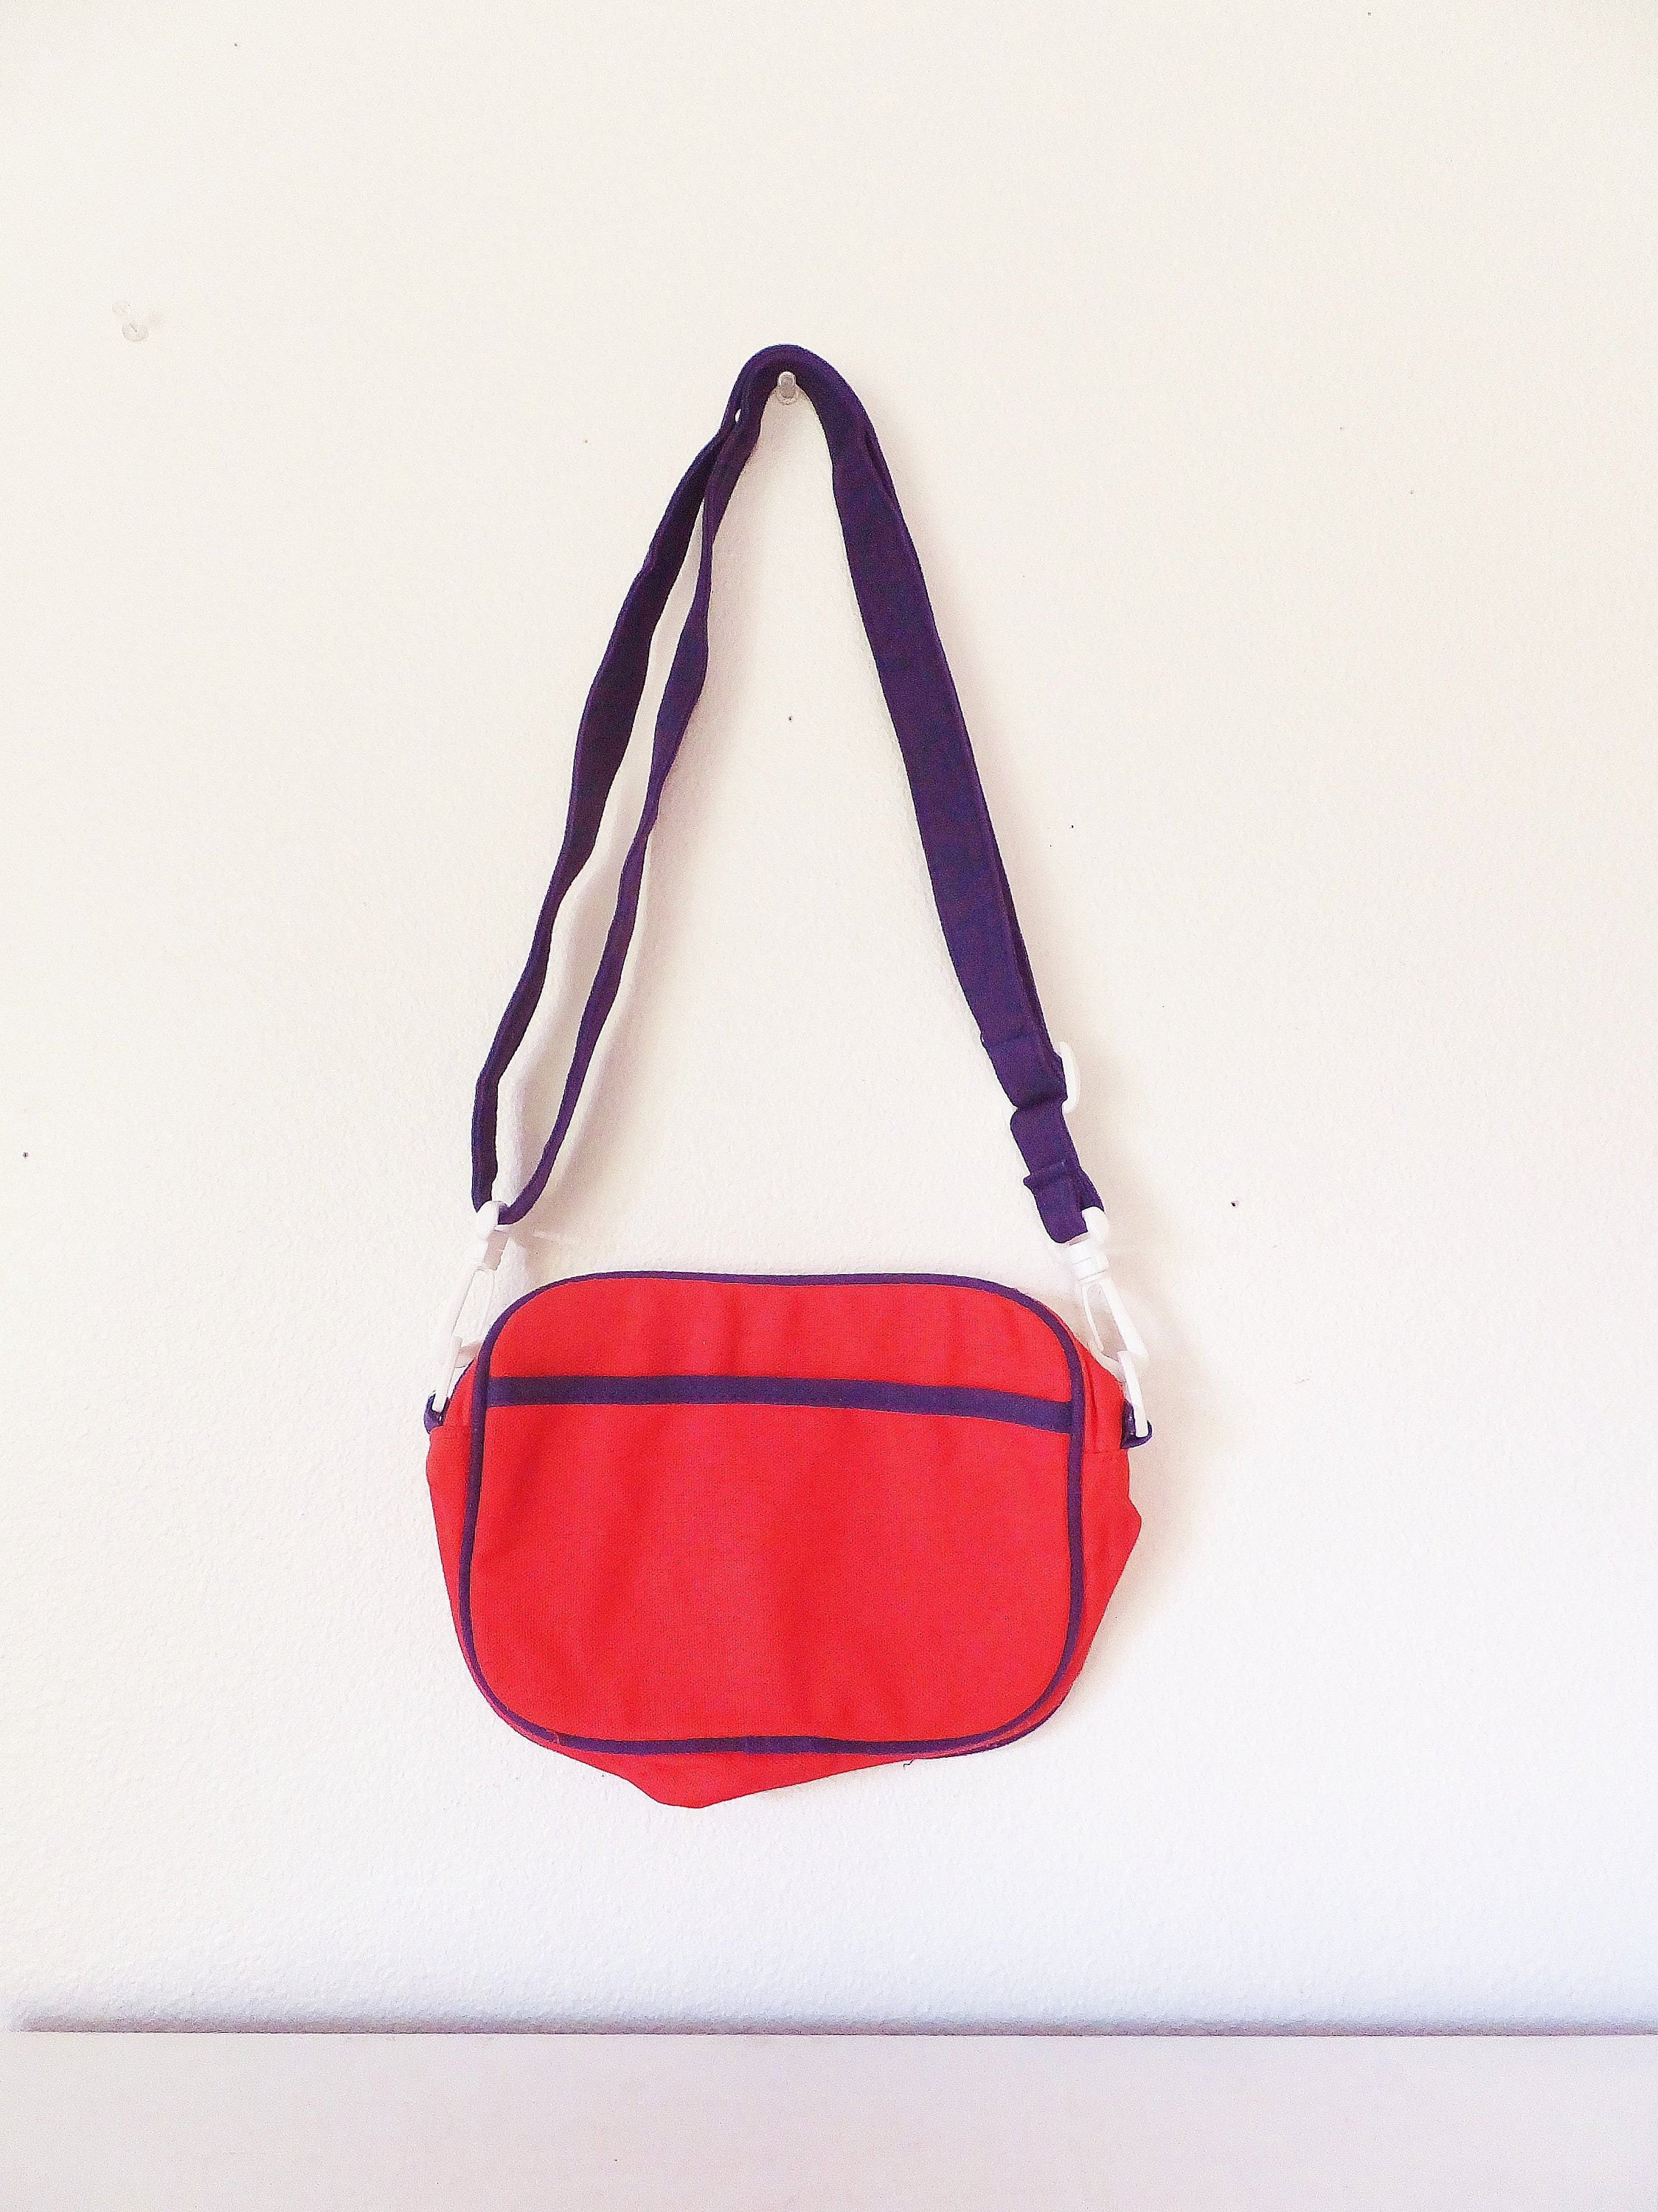 Red White Blue Purse 